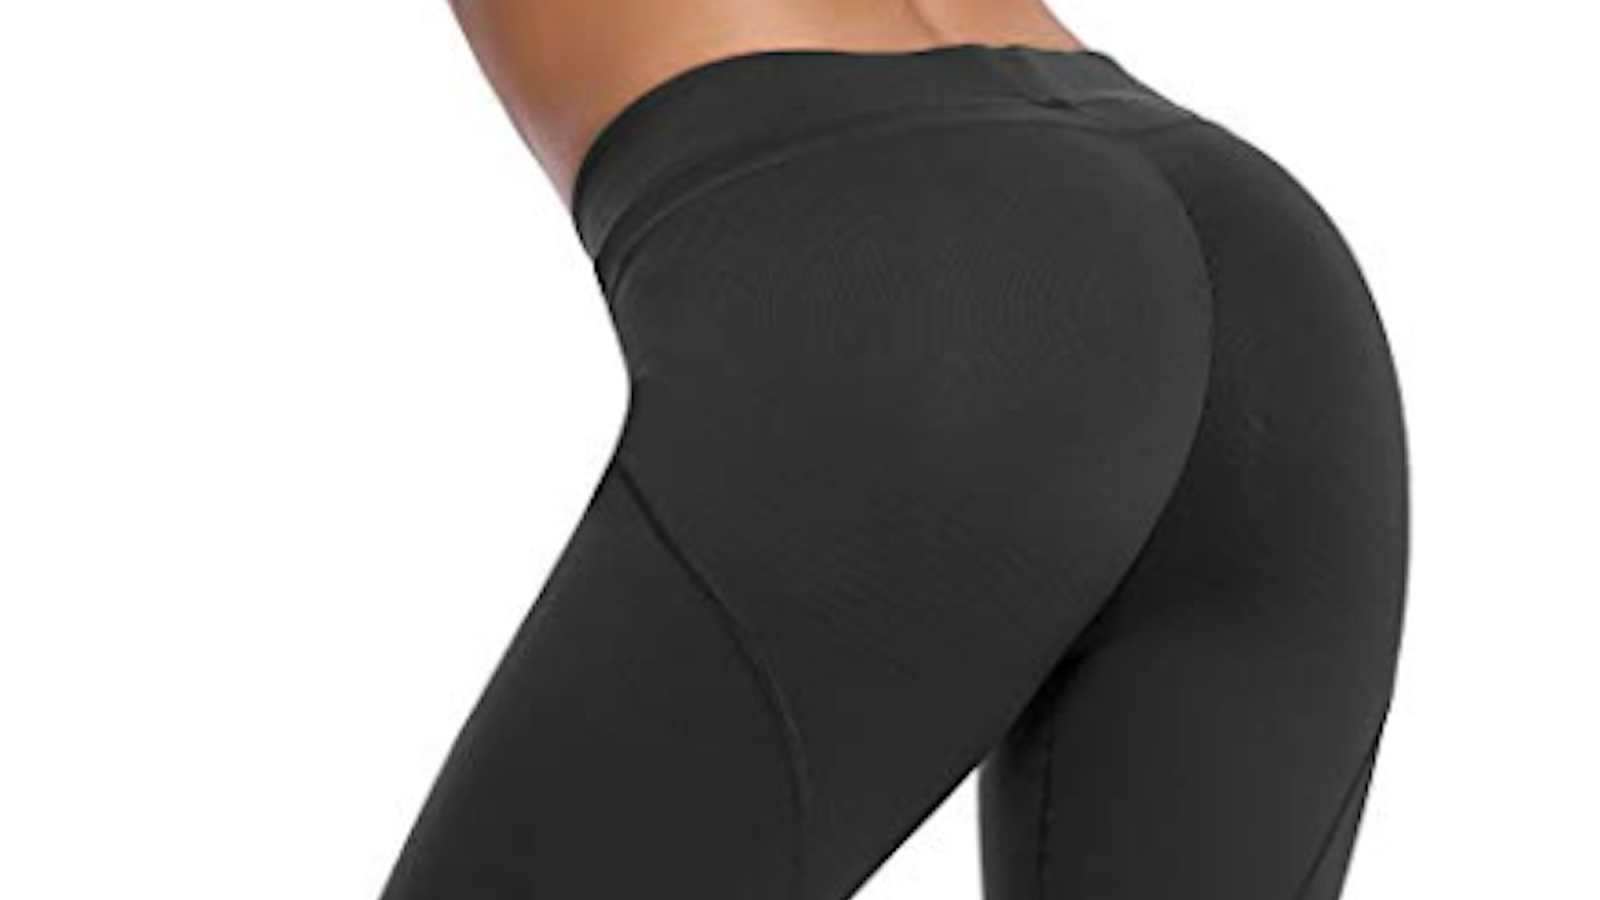 The Butt-Sculpting Leggings You've Seen All Over Instagram Are